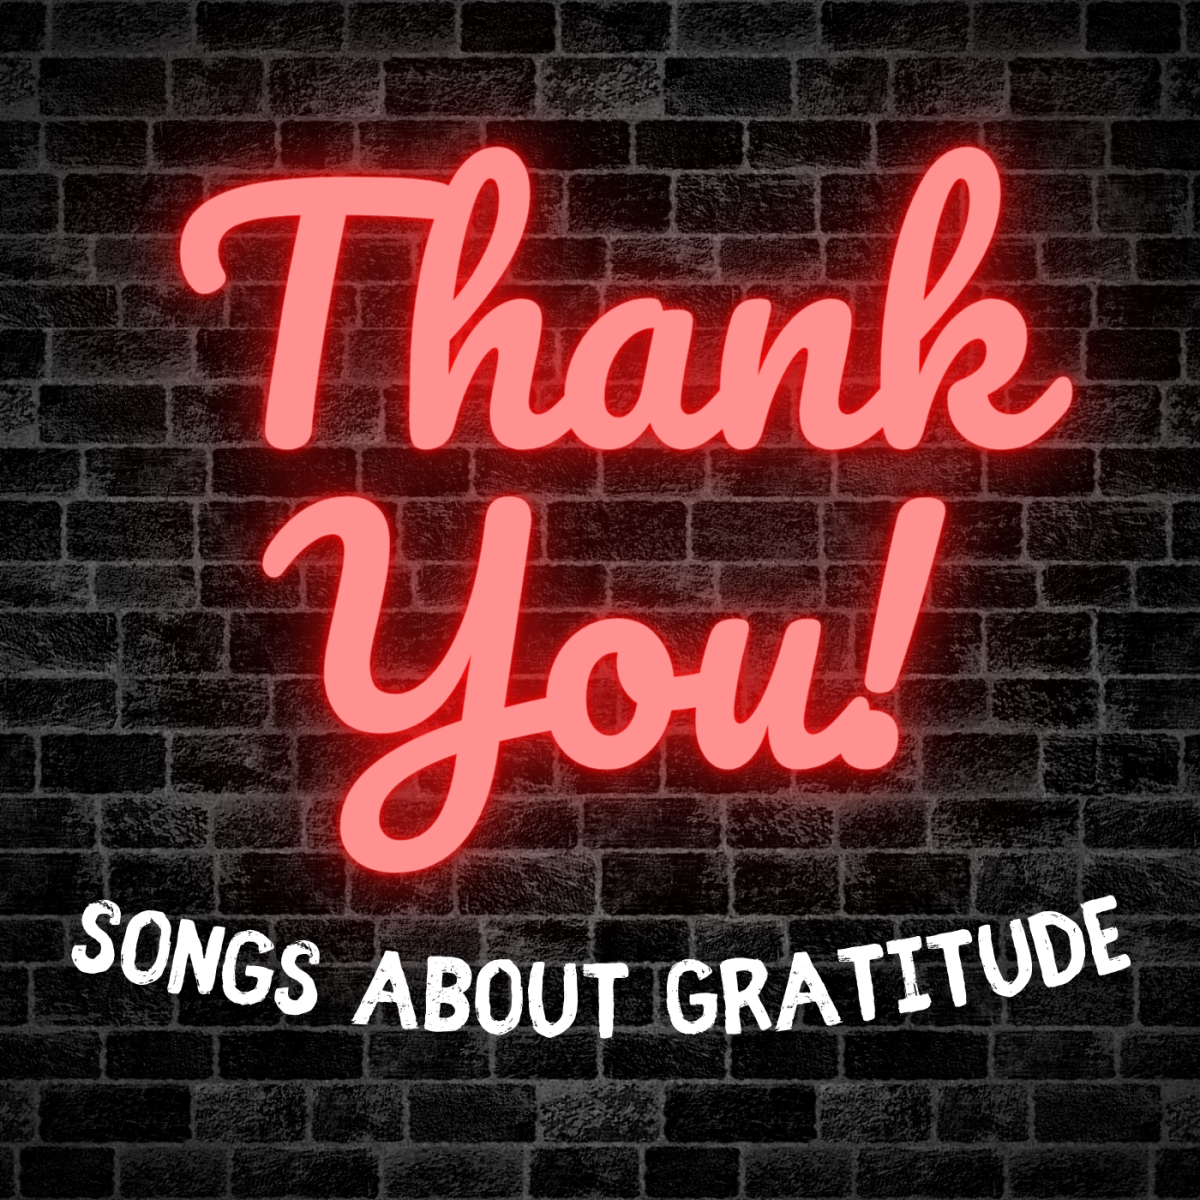 Express your gratitude with these songs about being thankful.